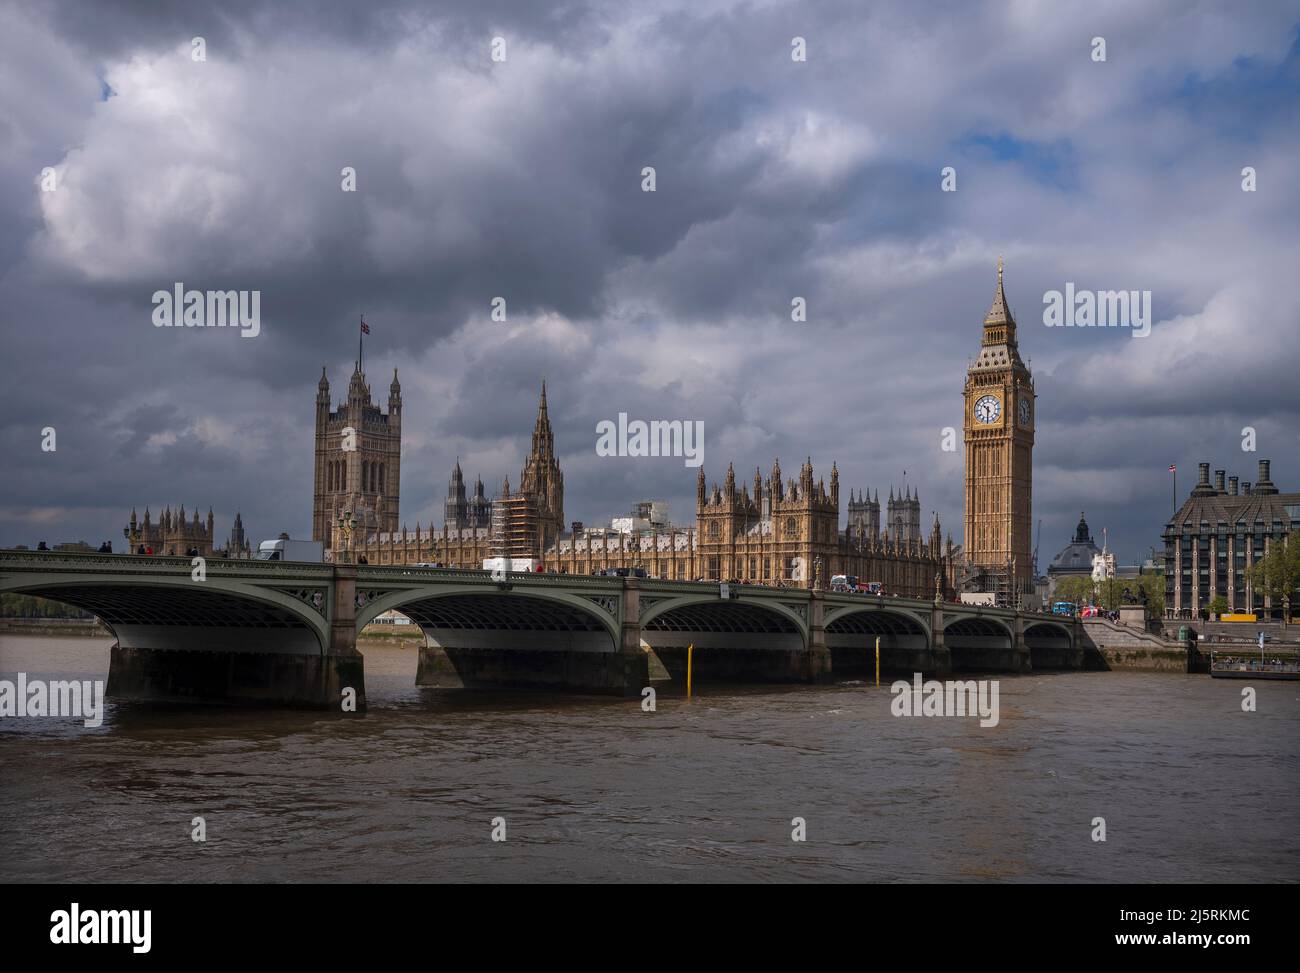 London England Houses of Parliament Big Ben Elizabeth Tower Cleaned April 2022 The Elizabeth Tower and the Clock Face of Big Ben shine after major cle Stock Photo